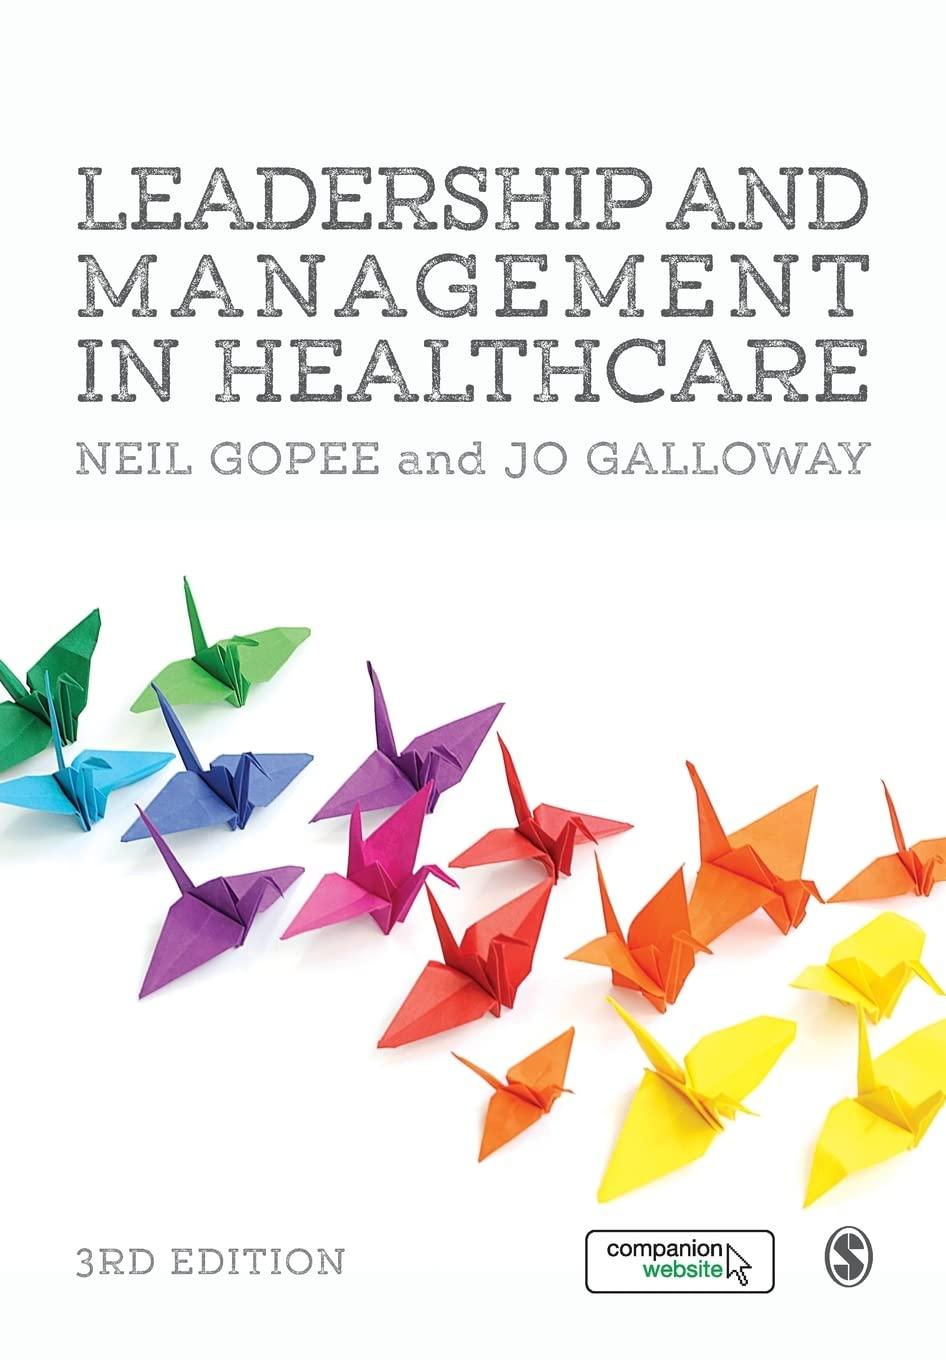 leadership and management in healthcare 3rd edition neil gopee, jo galloway 1473965020, 978-1473965027